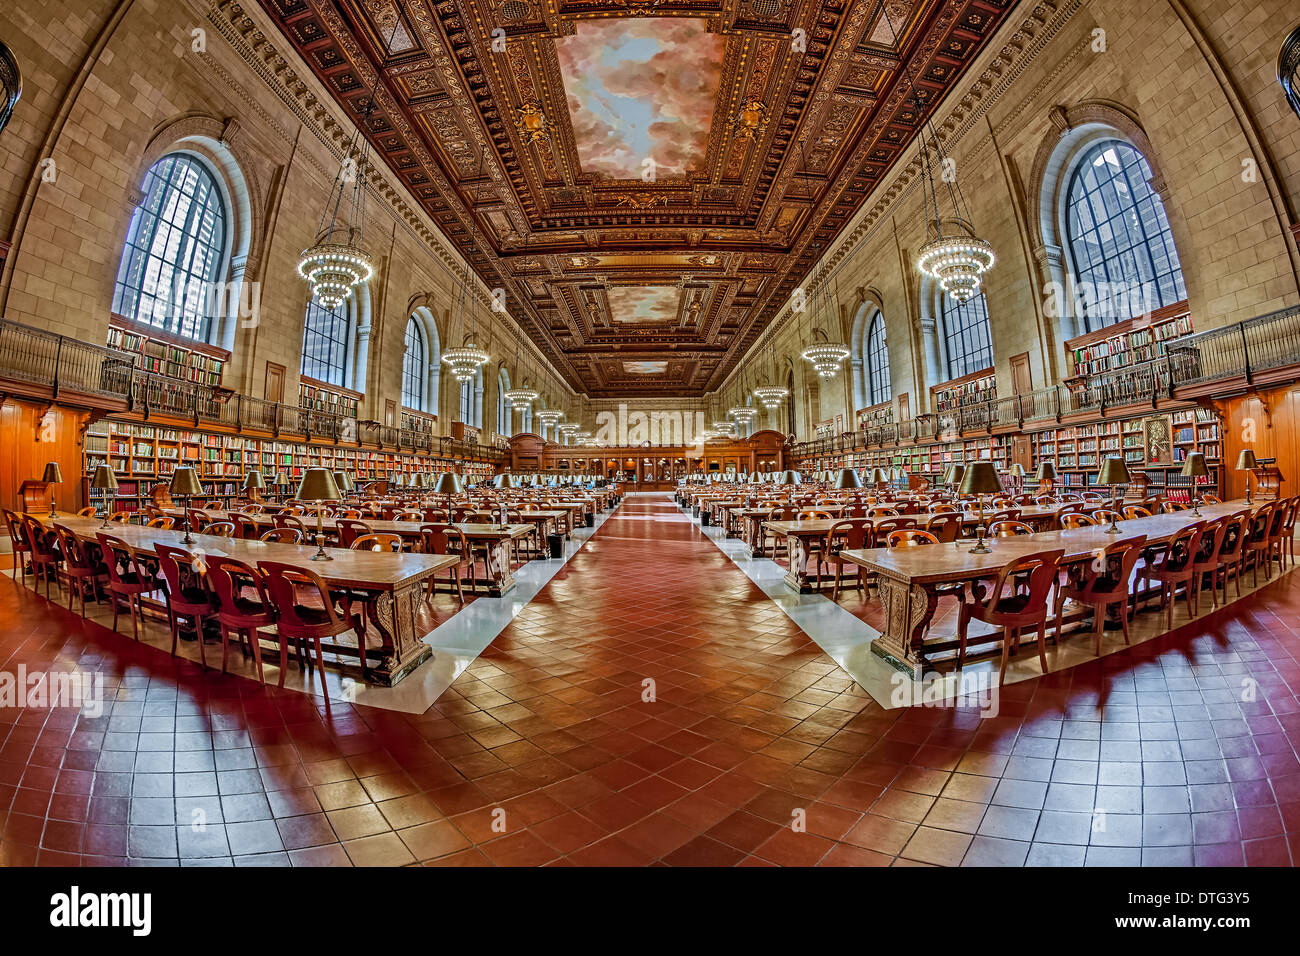 The ornate Rose Main Reading Room at the Stephen A. Schwarzman Building commonly known as the main branch of The New York Public Library located on 5th Avenue and 42nd Street in New York City. Stock Photo